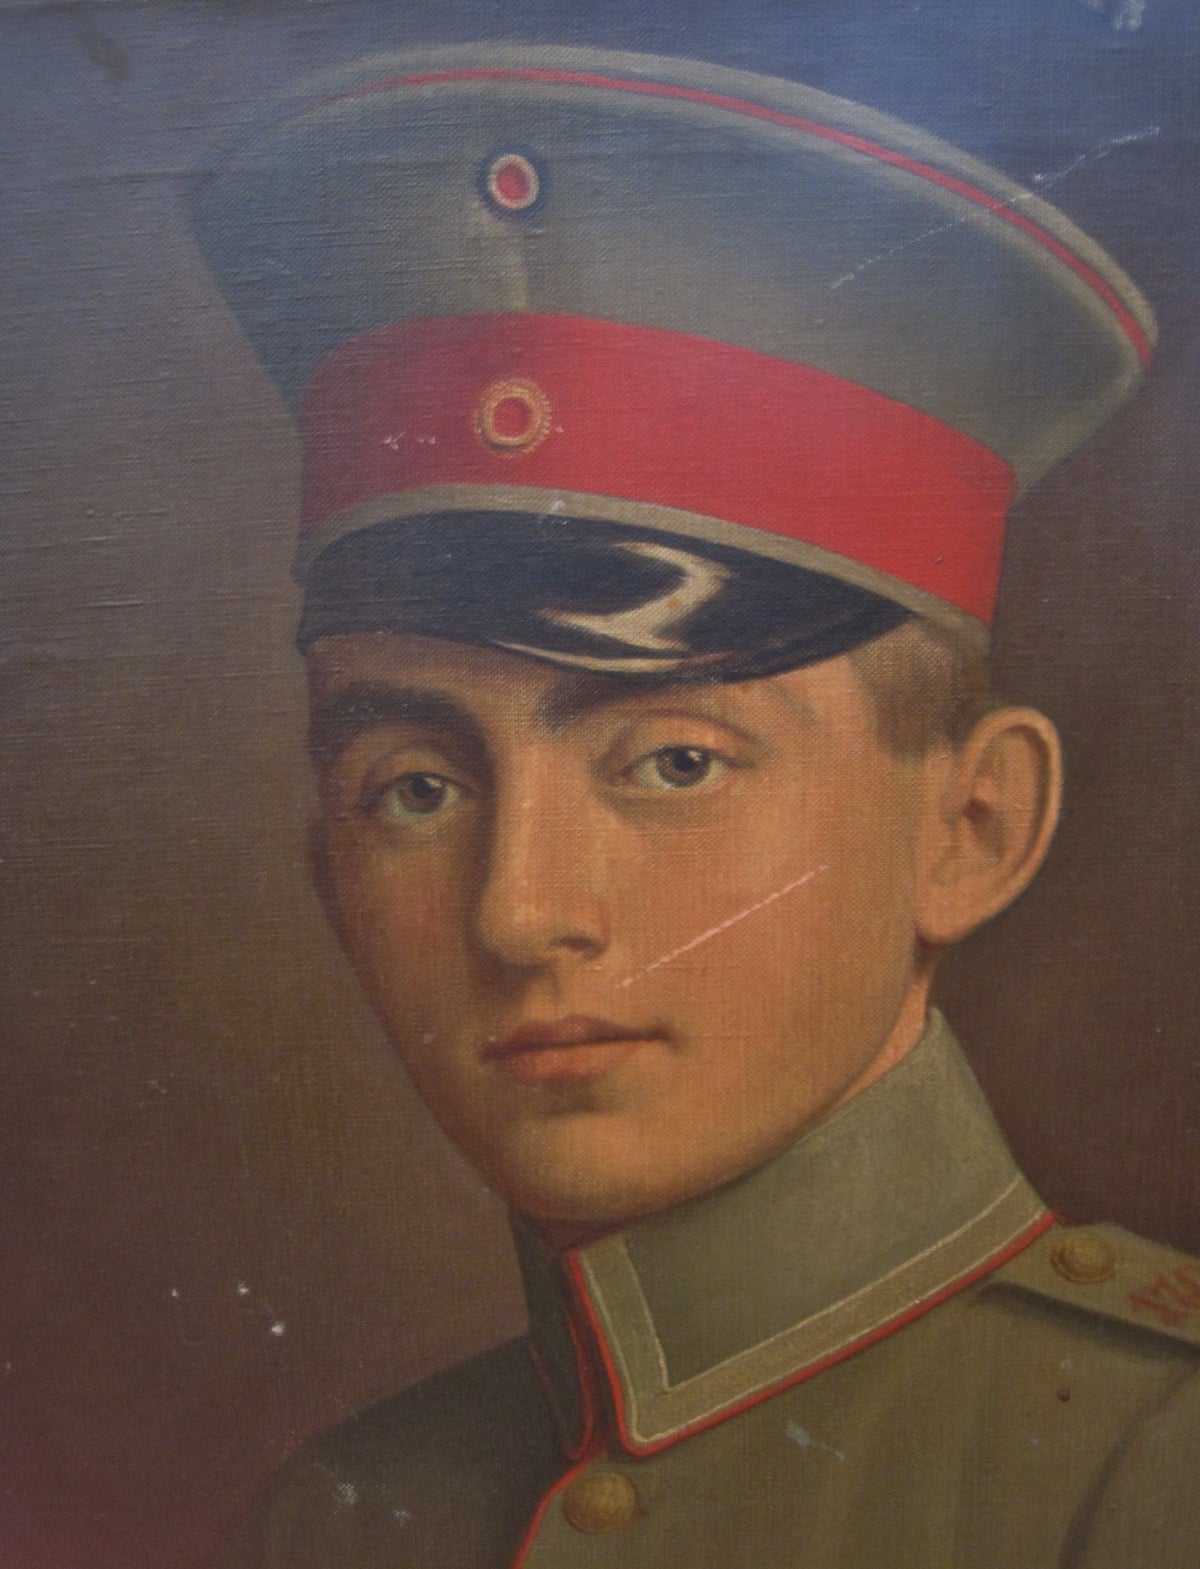 WWI German Military Officer Oil on Canvas Painting Signed Schultis

Free shipping within the United States and Canada.